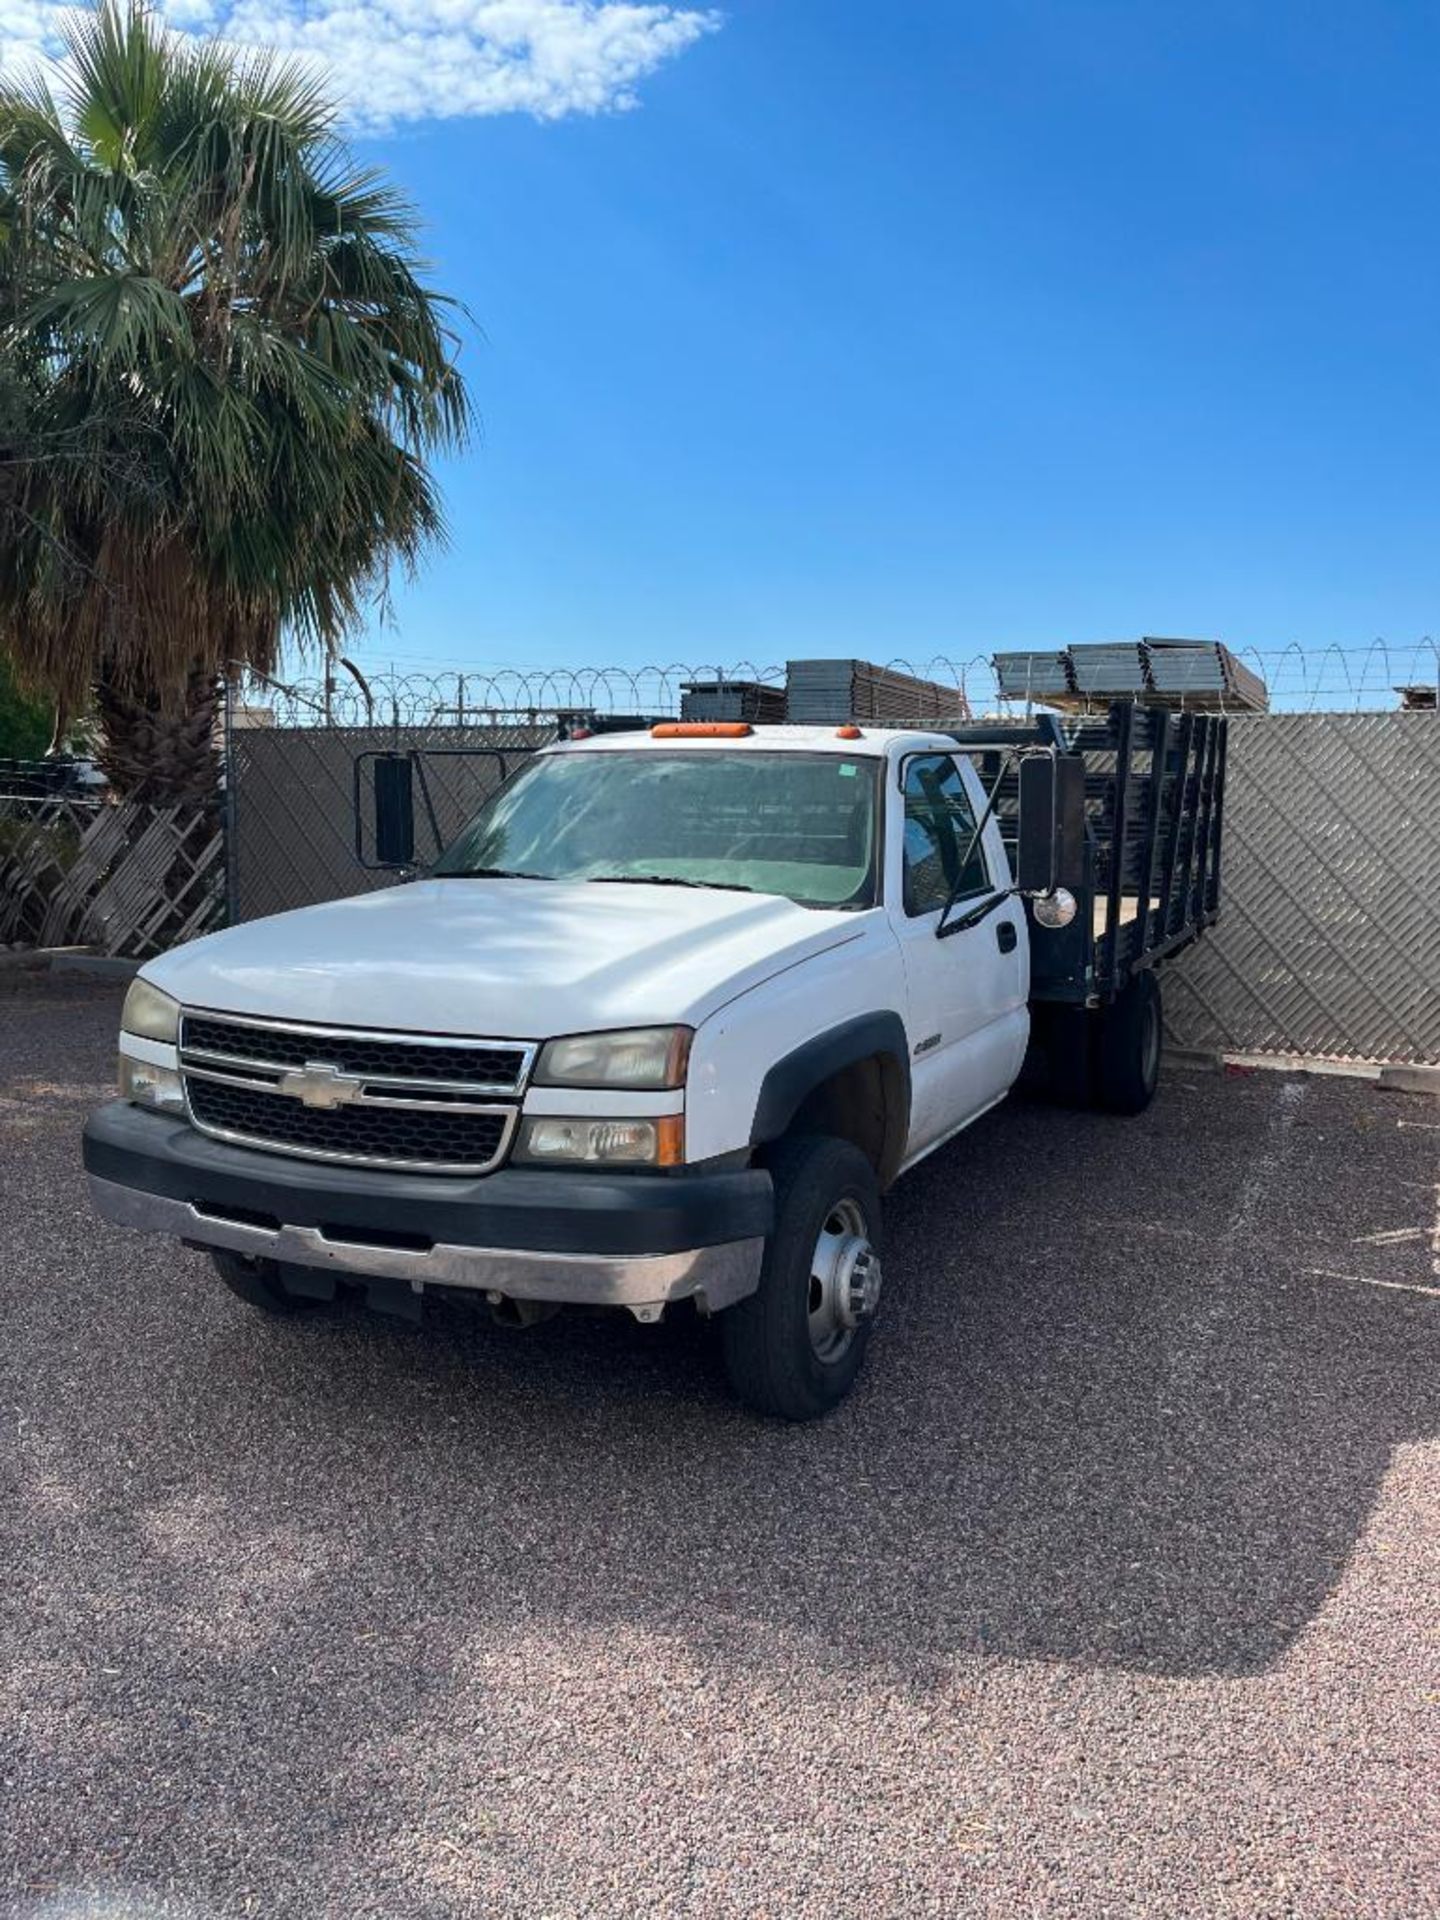 2006 Chevrolet 3500 Single Cab Dually Stake Bed Pickup, 10' Bed, Gasoline Powered, Vin: 1GBJC34UX6E2